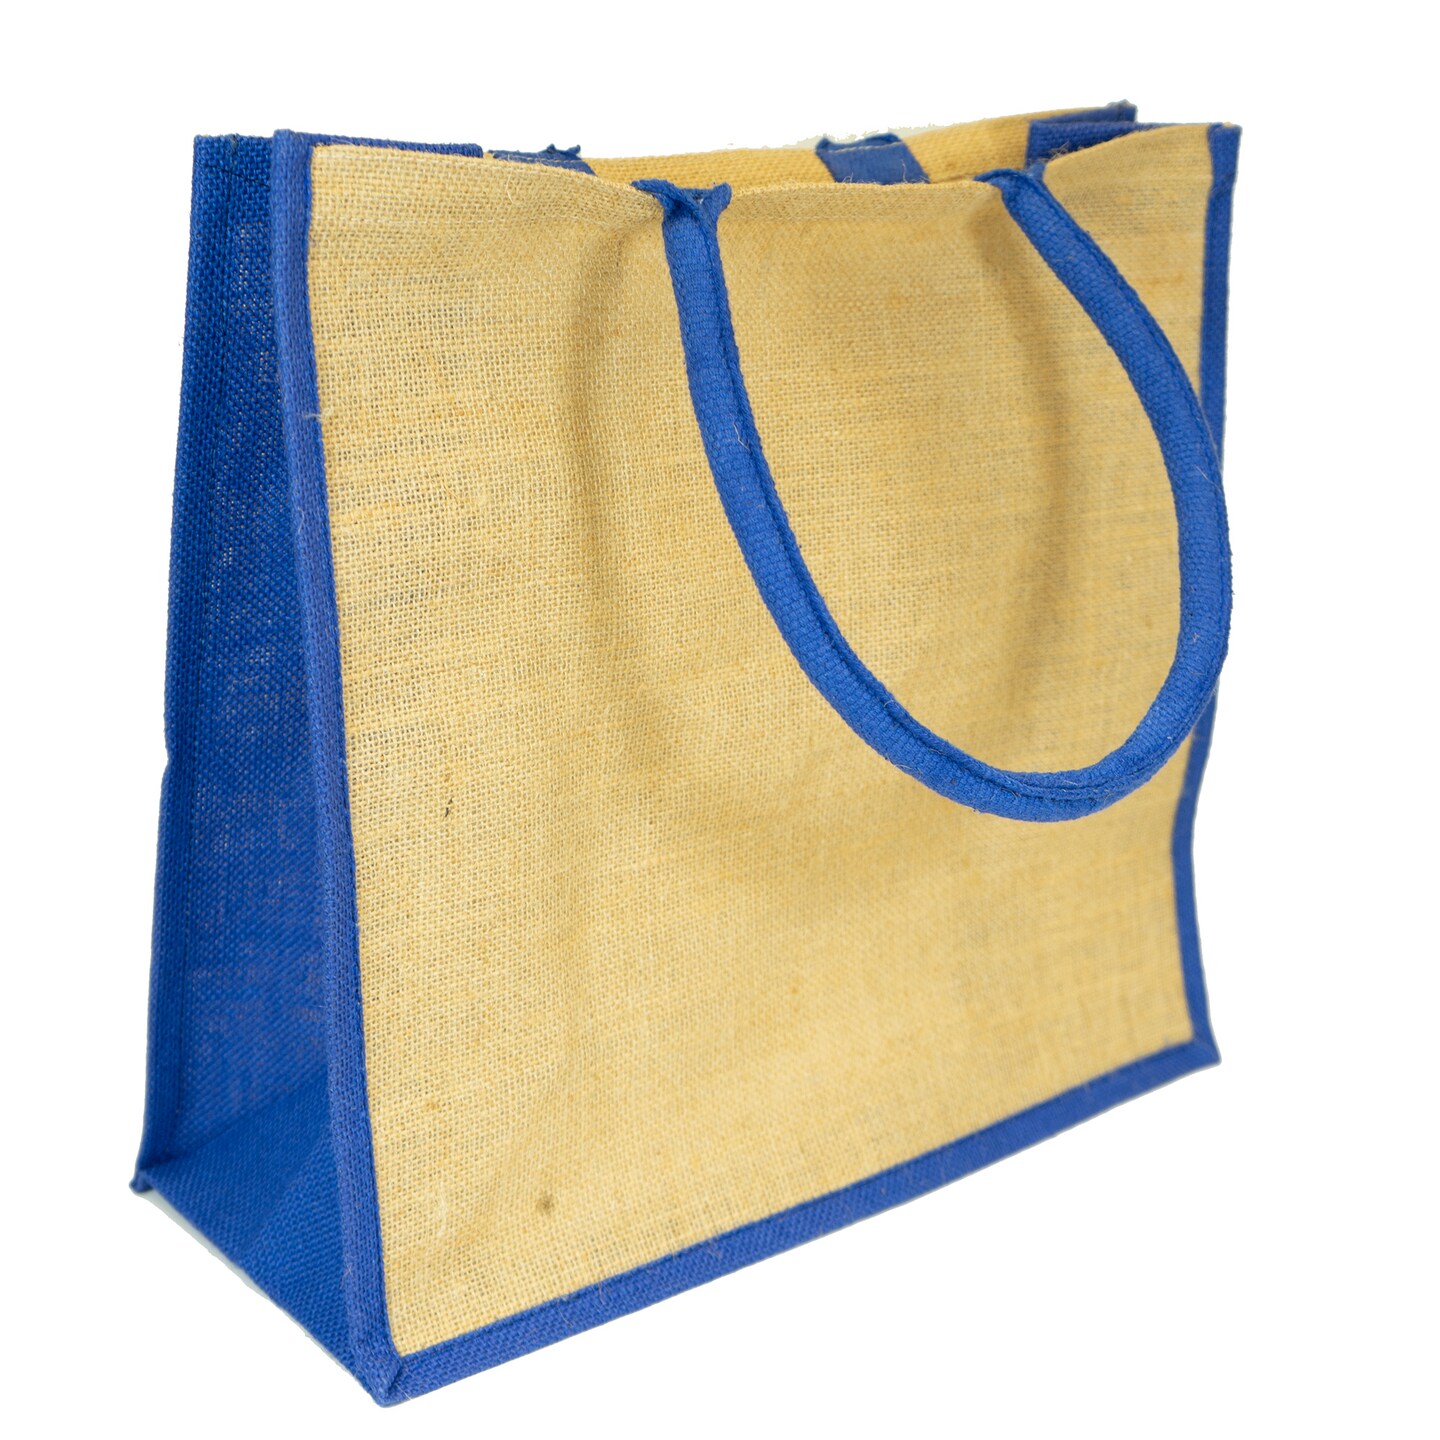 KALIDI FANCY FOREST Large Beach Bag Canvas Jute Tote Bag Woven Beach India  | Ubuy